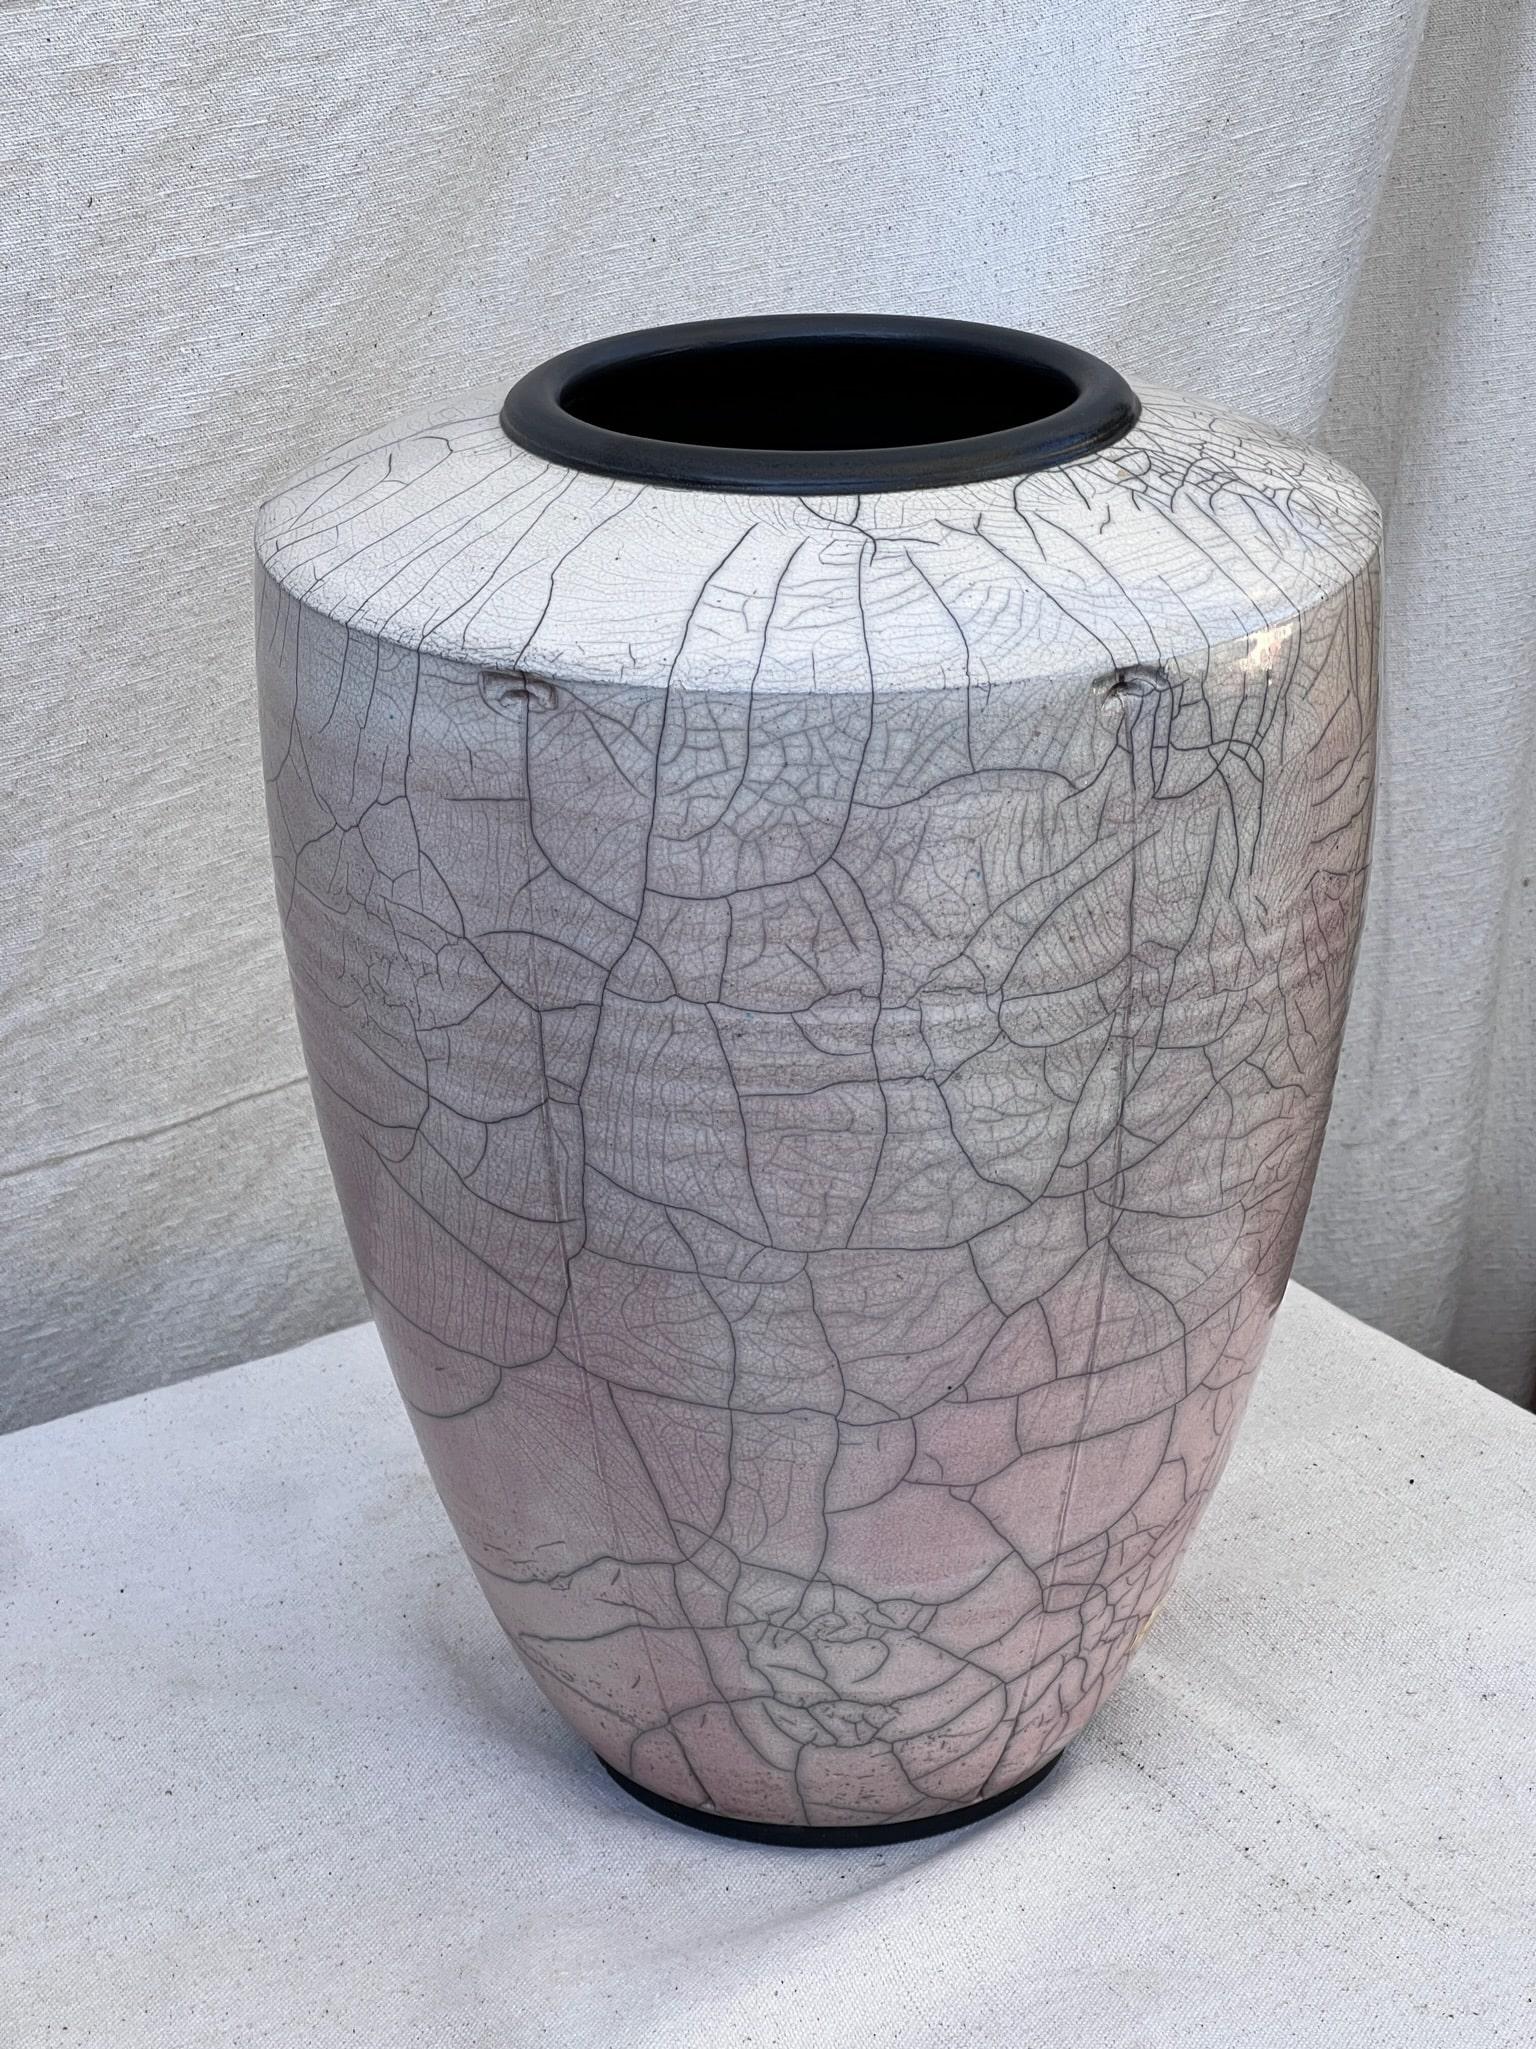 1980s Crackle Glaze Raku Pottery Vase In Good Condition For Sale In West Hollywood, CA